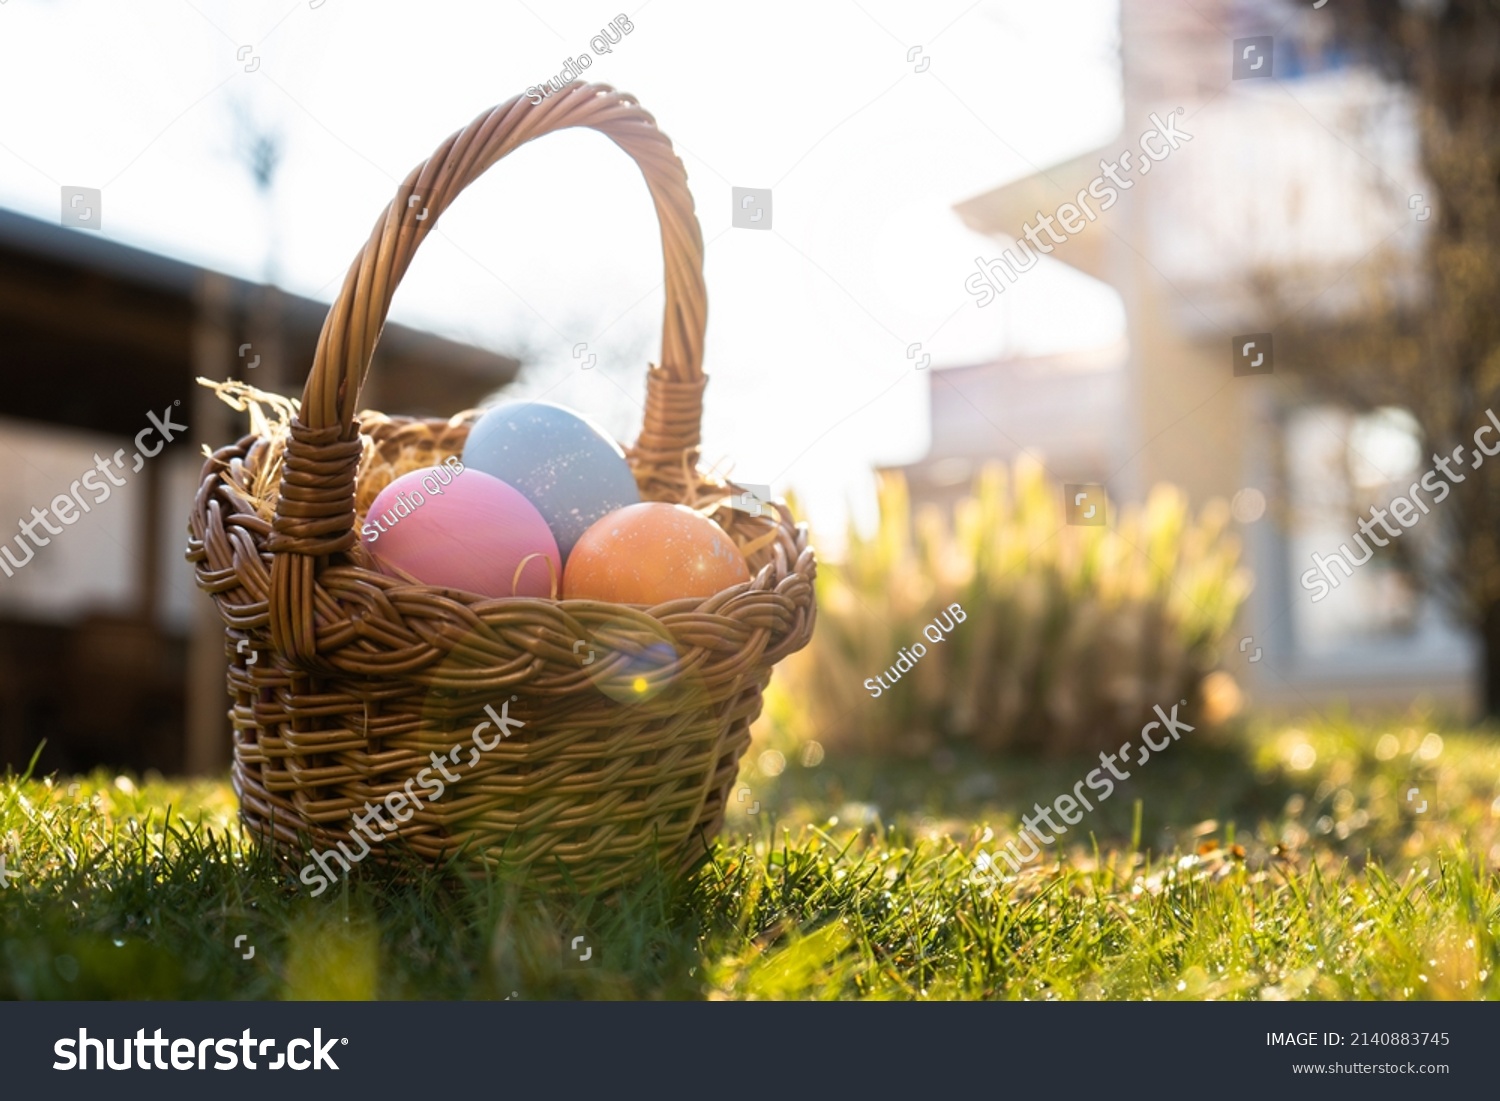 Happy Easter. Basket with Easter eggs in grass on a sunny spring day - Easter decoration, banner, panorama, background with copy space for text. #2140883745